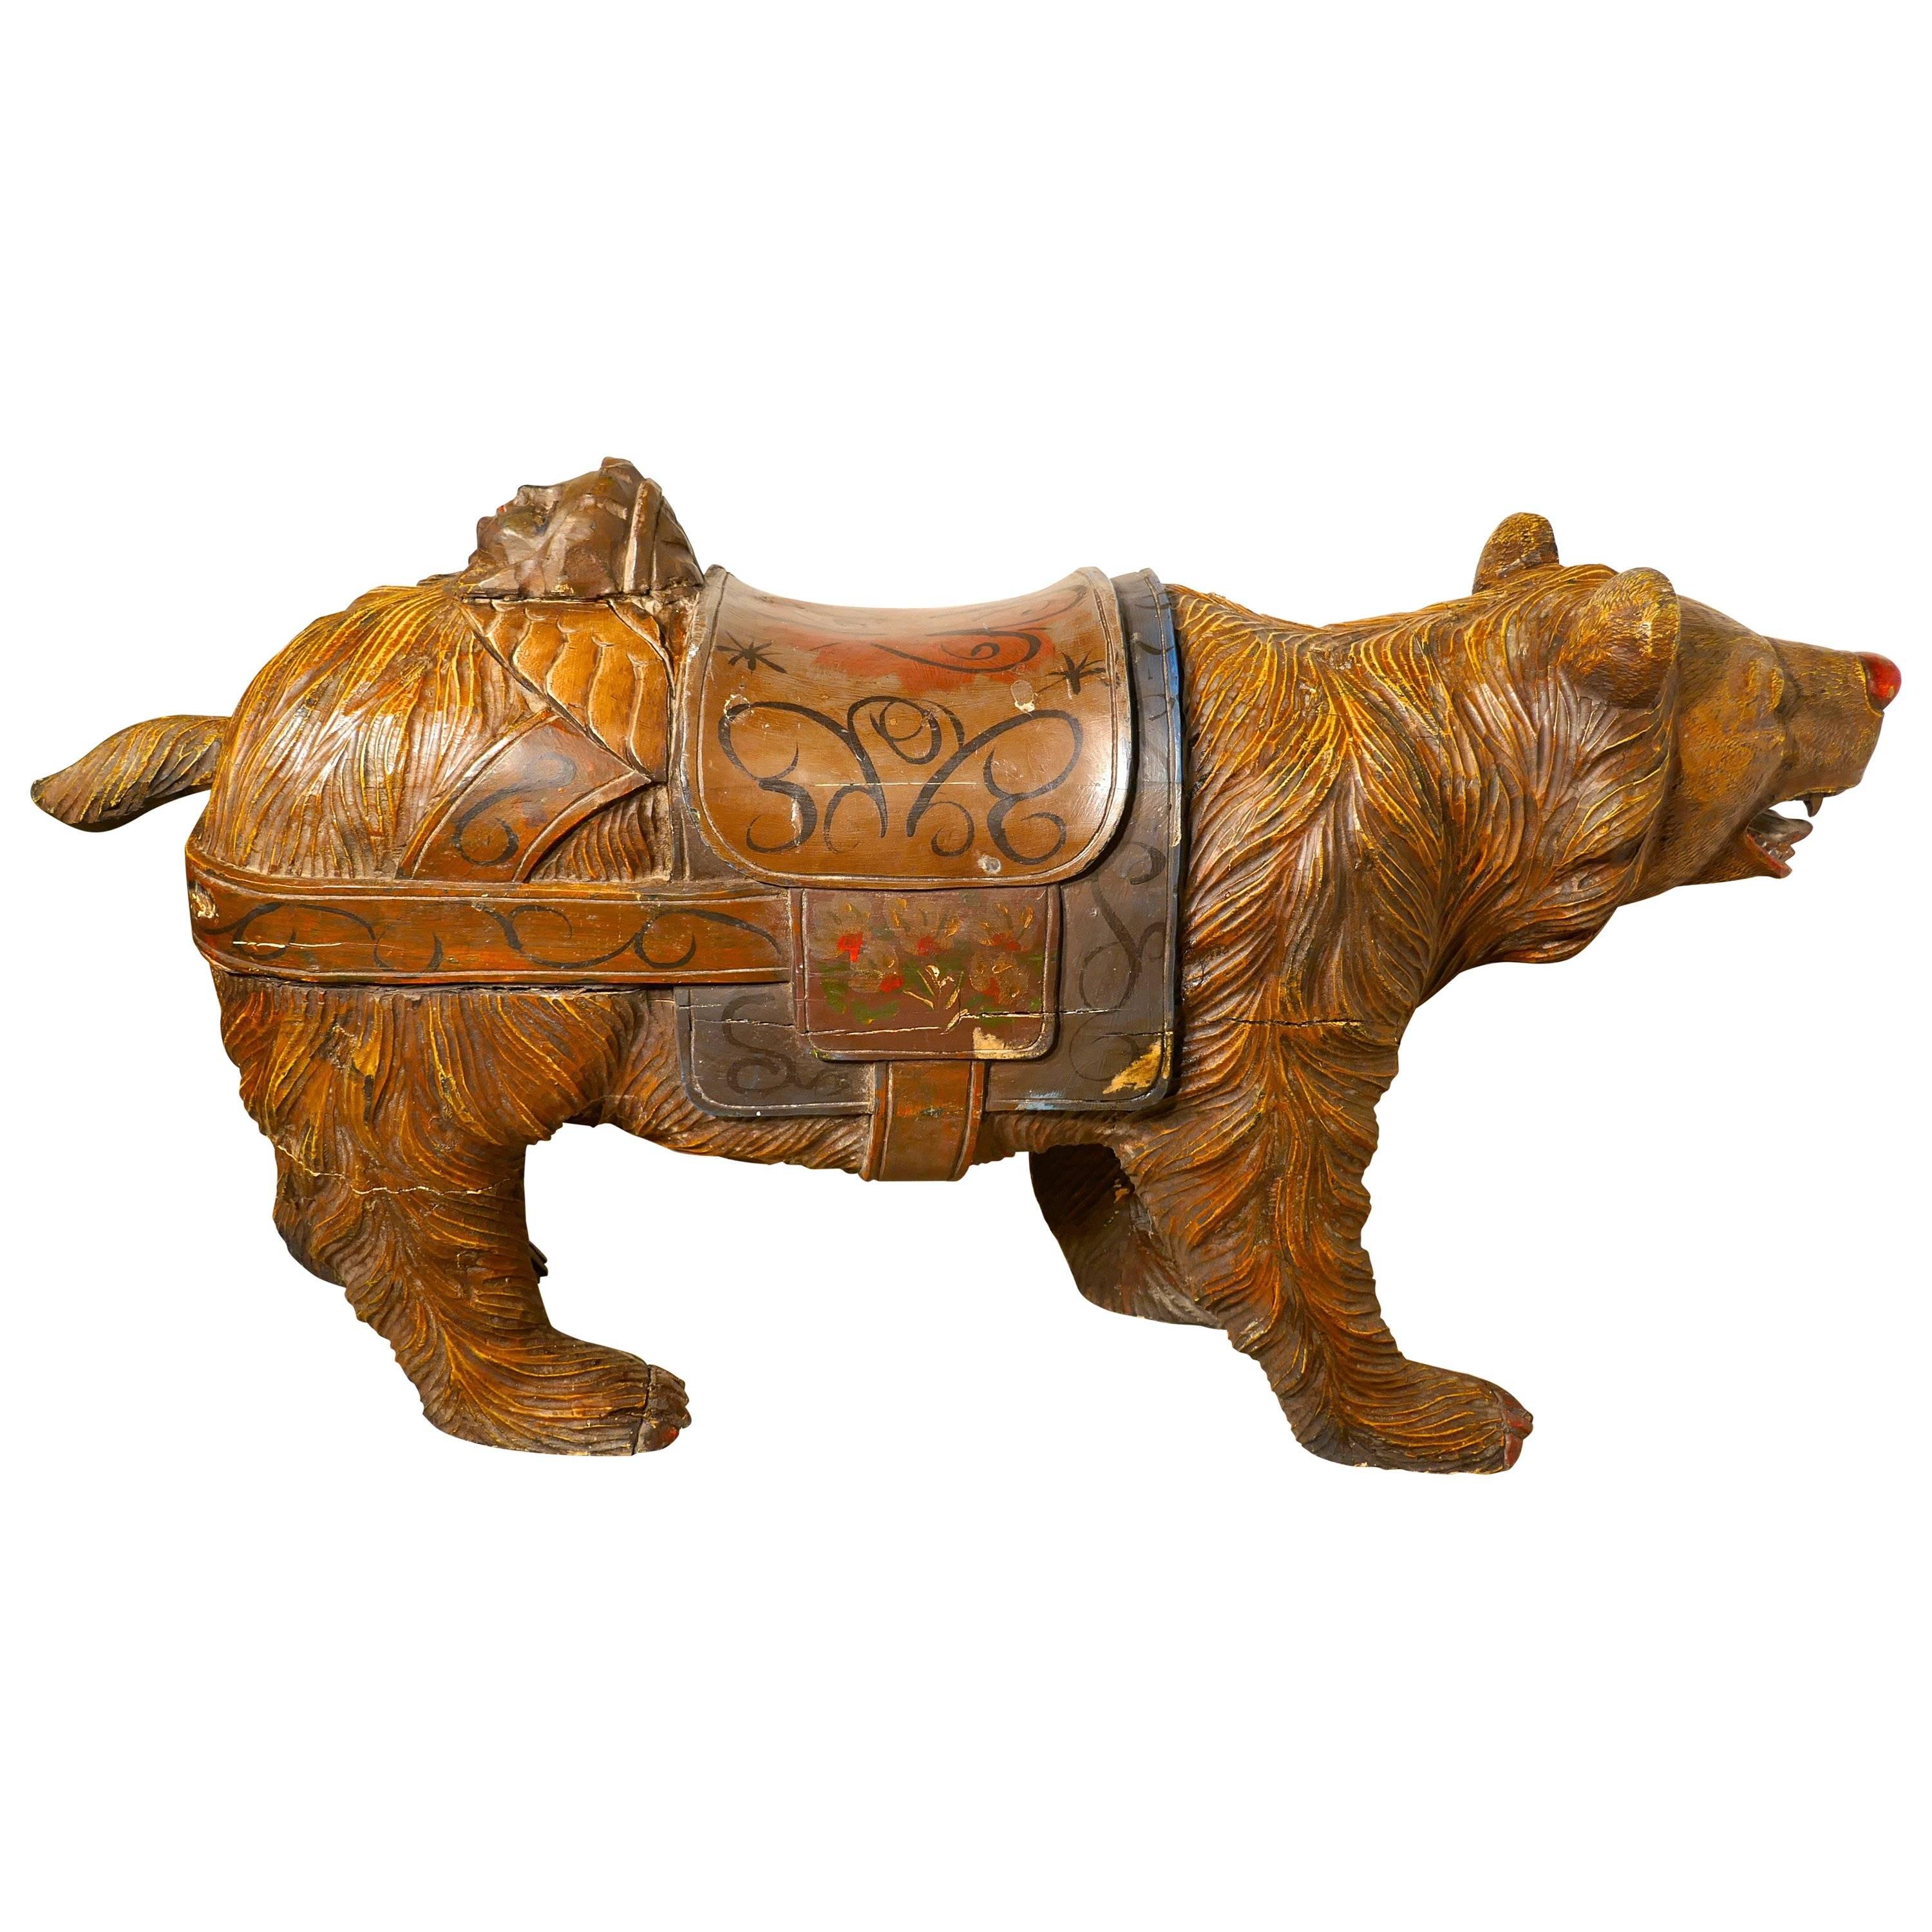 This charming if somewhat fearsome beast is a 19th century carved wooden bear he originates from the Black Forrest and has has detailed carving with Folk Art painted decoration
Our bear comes from a country merry go round or carousel, he is made